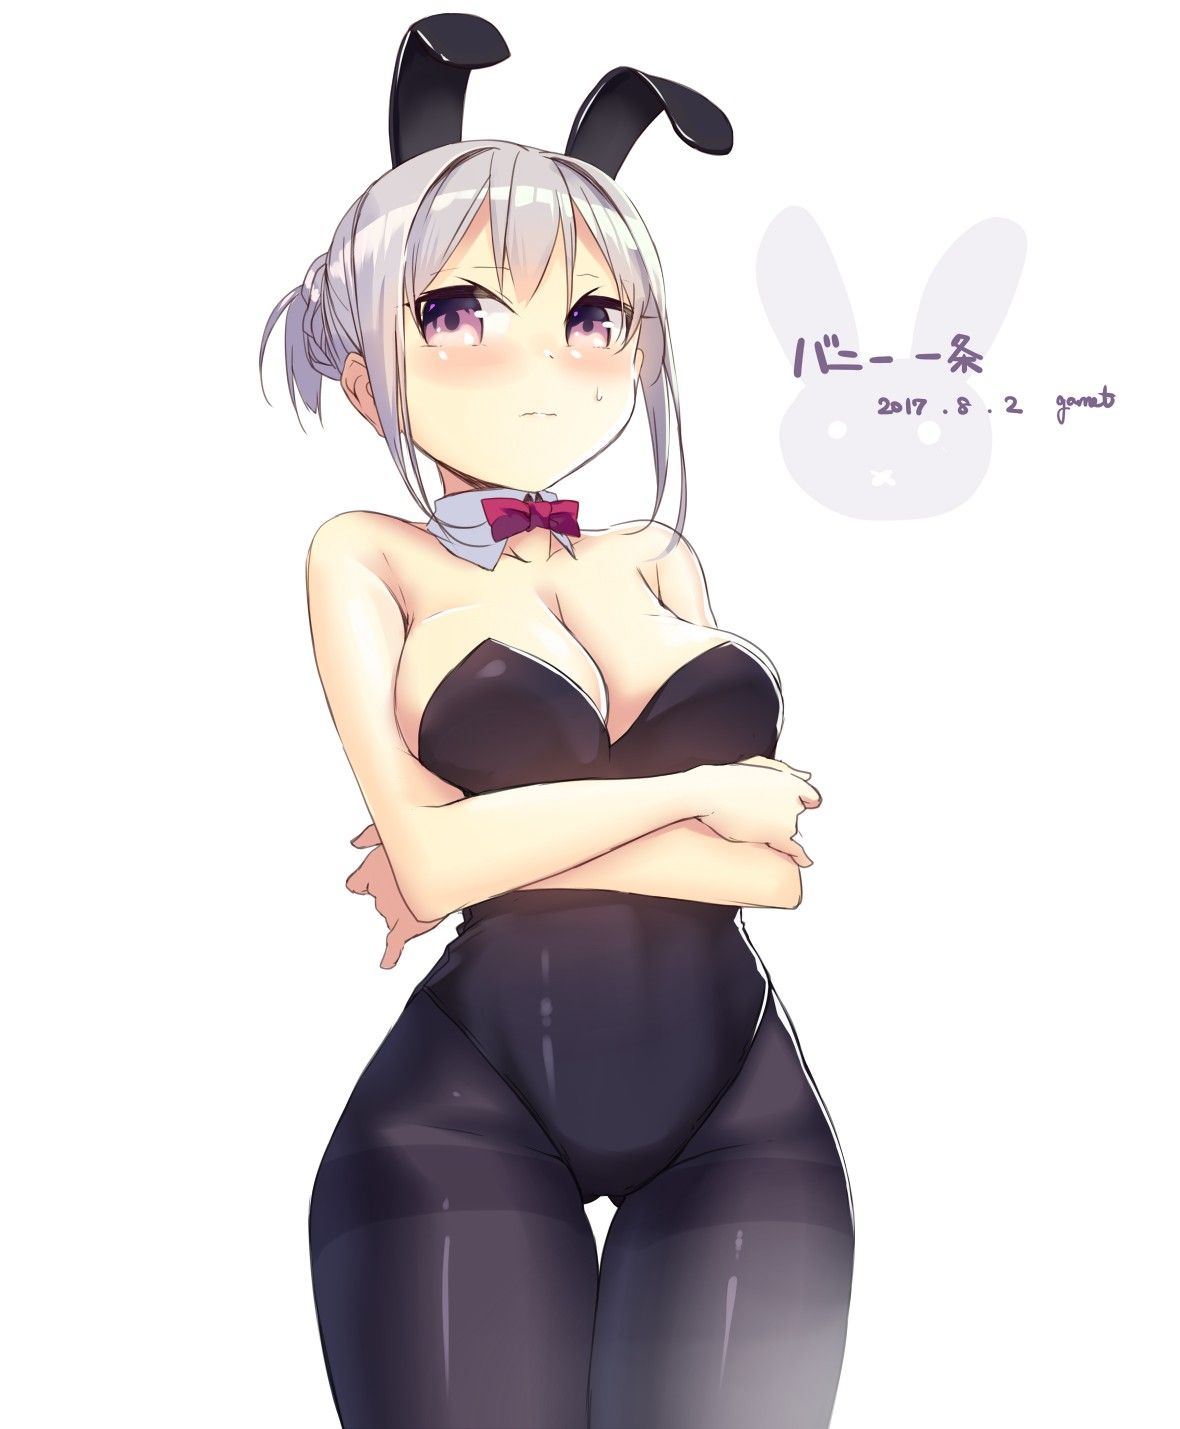 [2nd] Sexy Bunny Girl Pretty Second Erotic Image Part 38 [Bunny Girl] 23